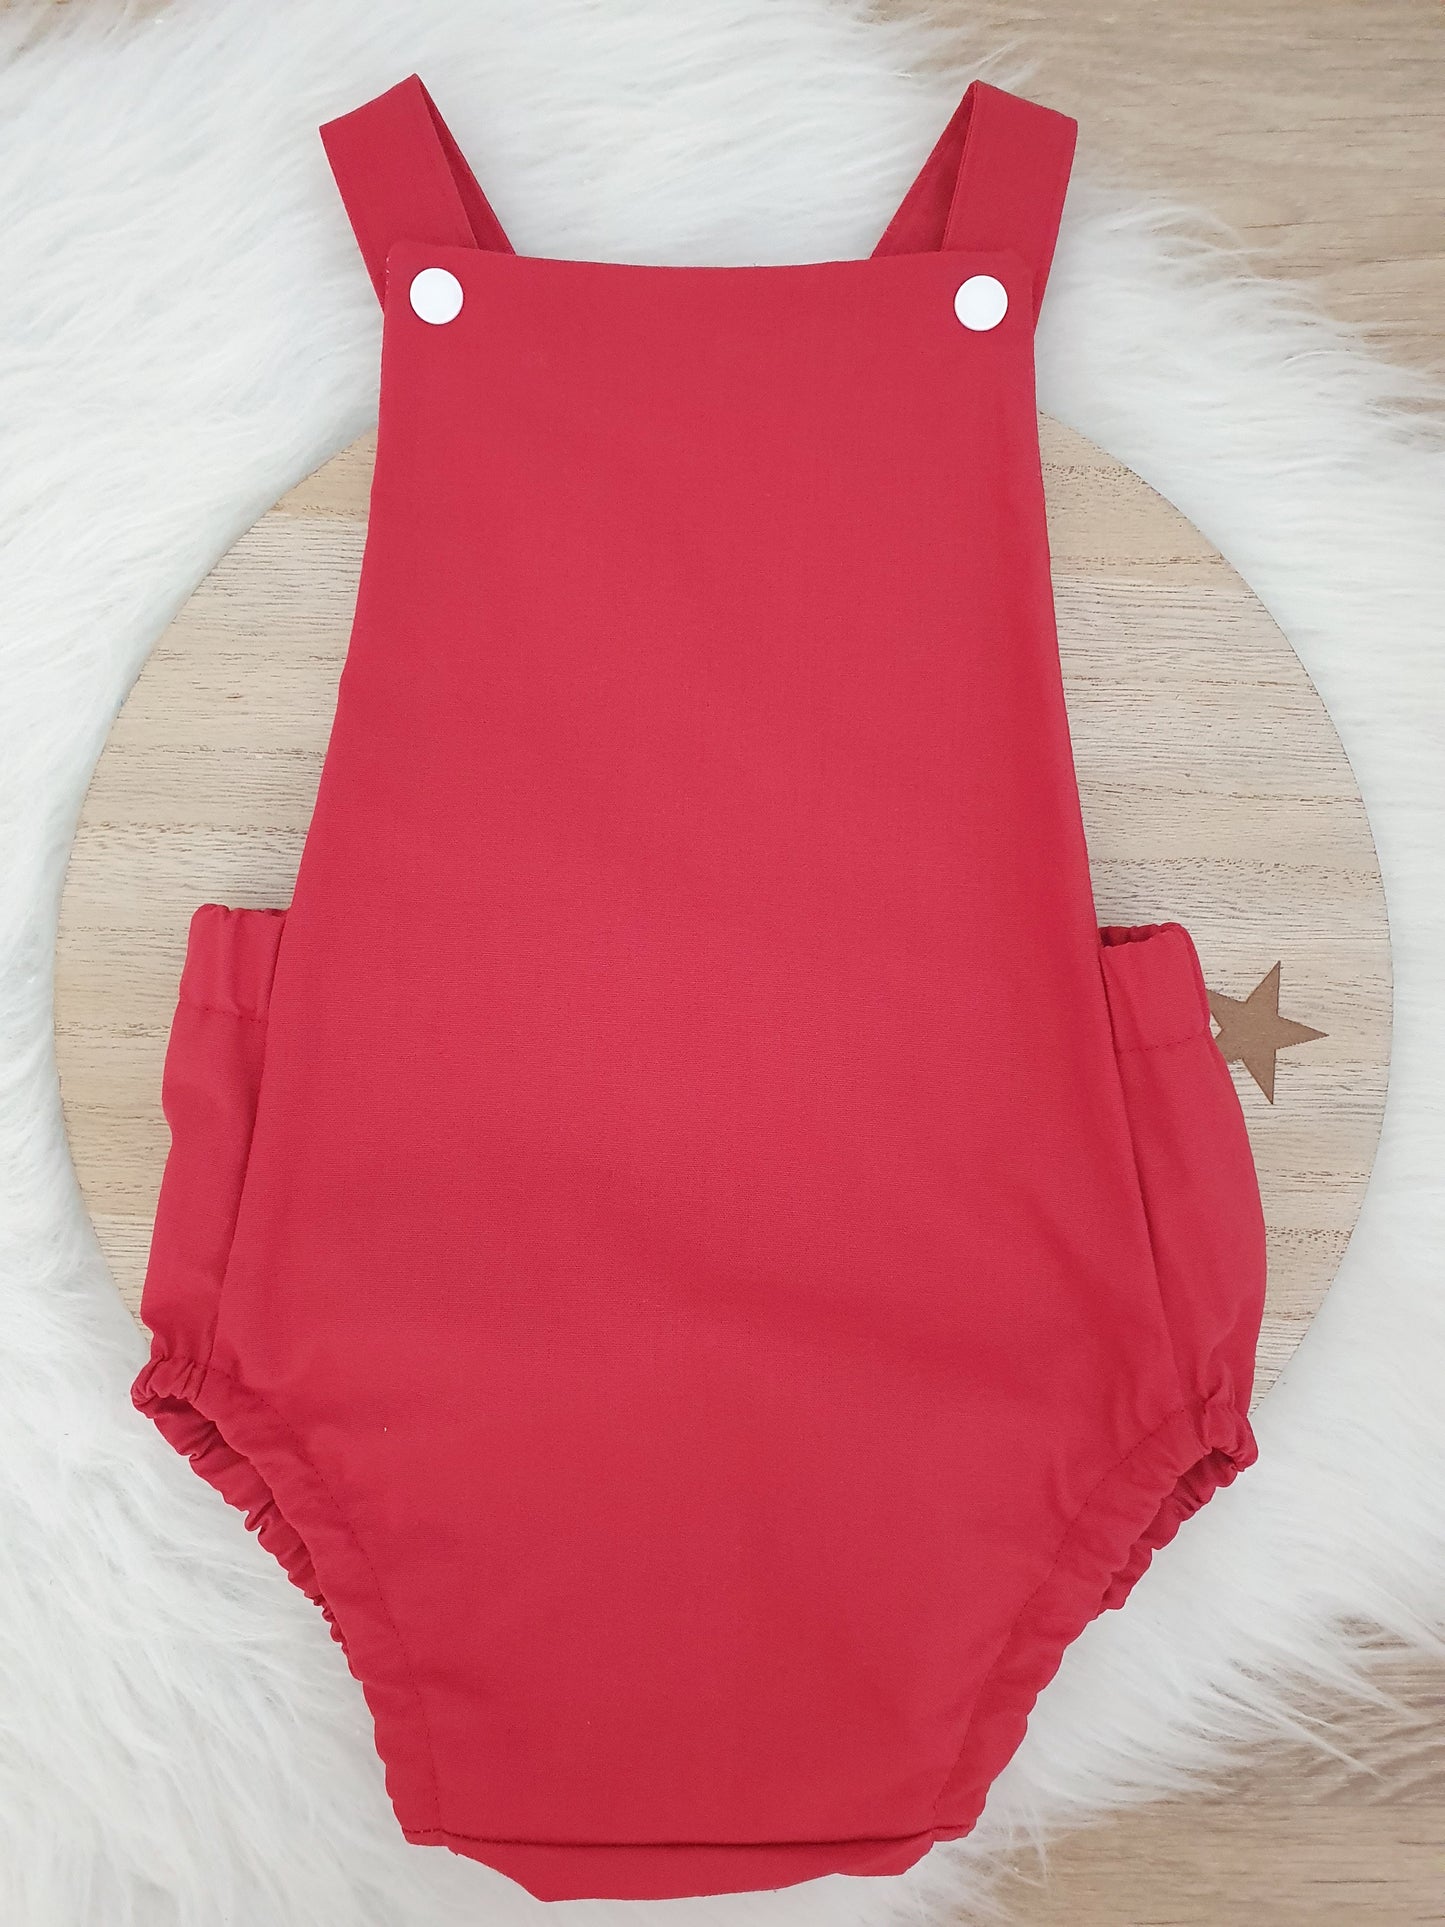 Red Baby Romper, Handmade Baby Clothing, Size 1 - 1st Birthday Clothing / Cake Smash Outfit - BRICK RED, 12 - 18 months